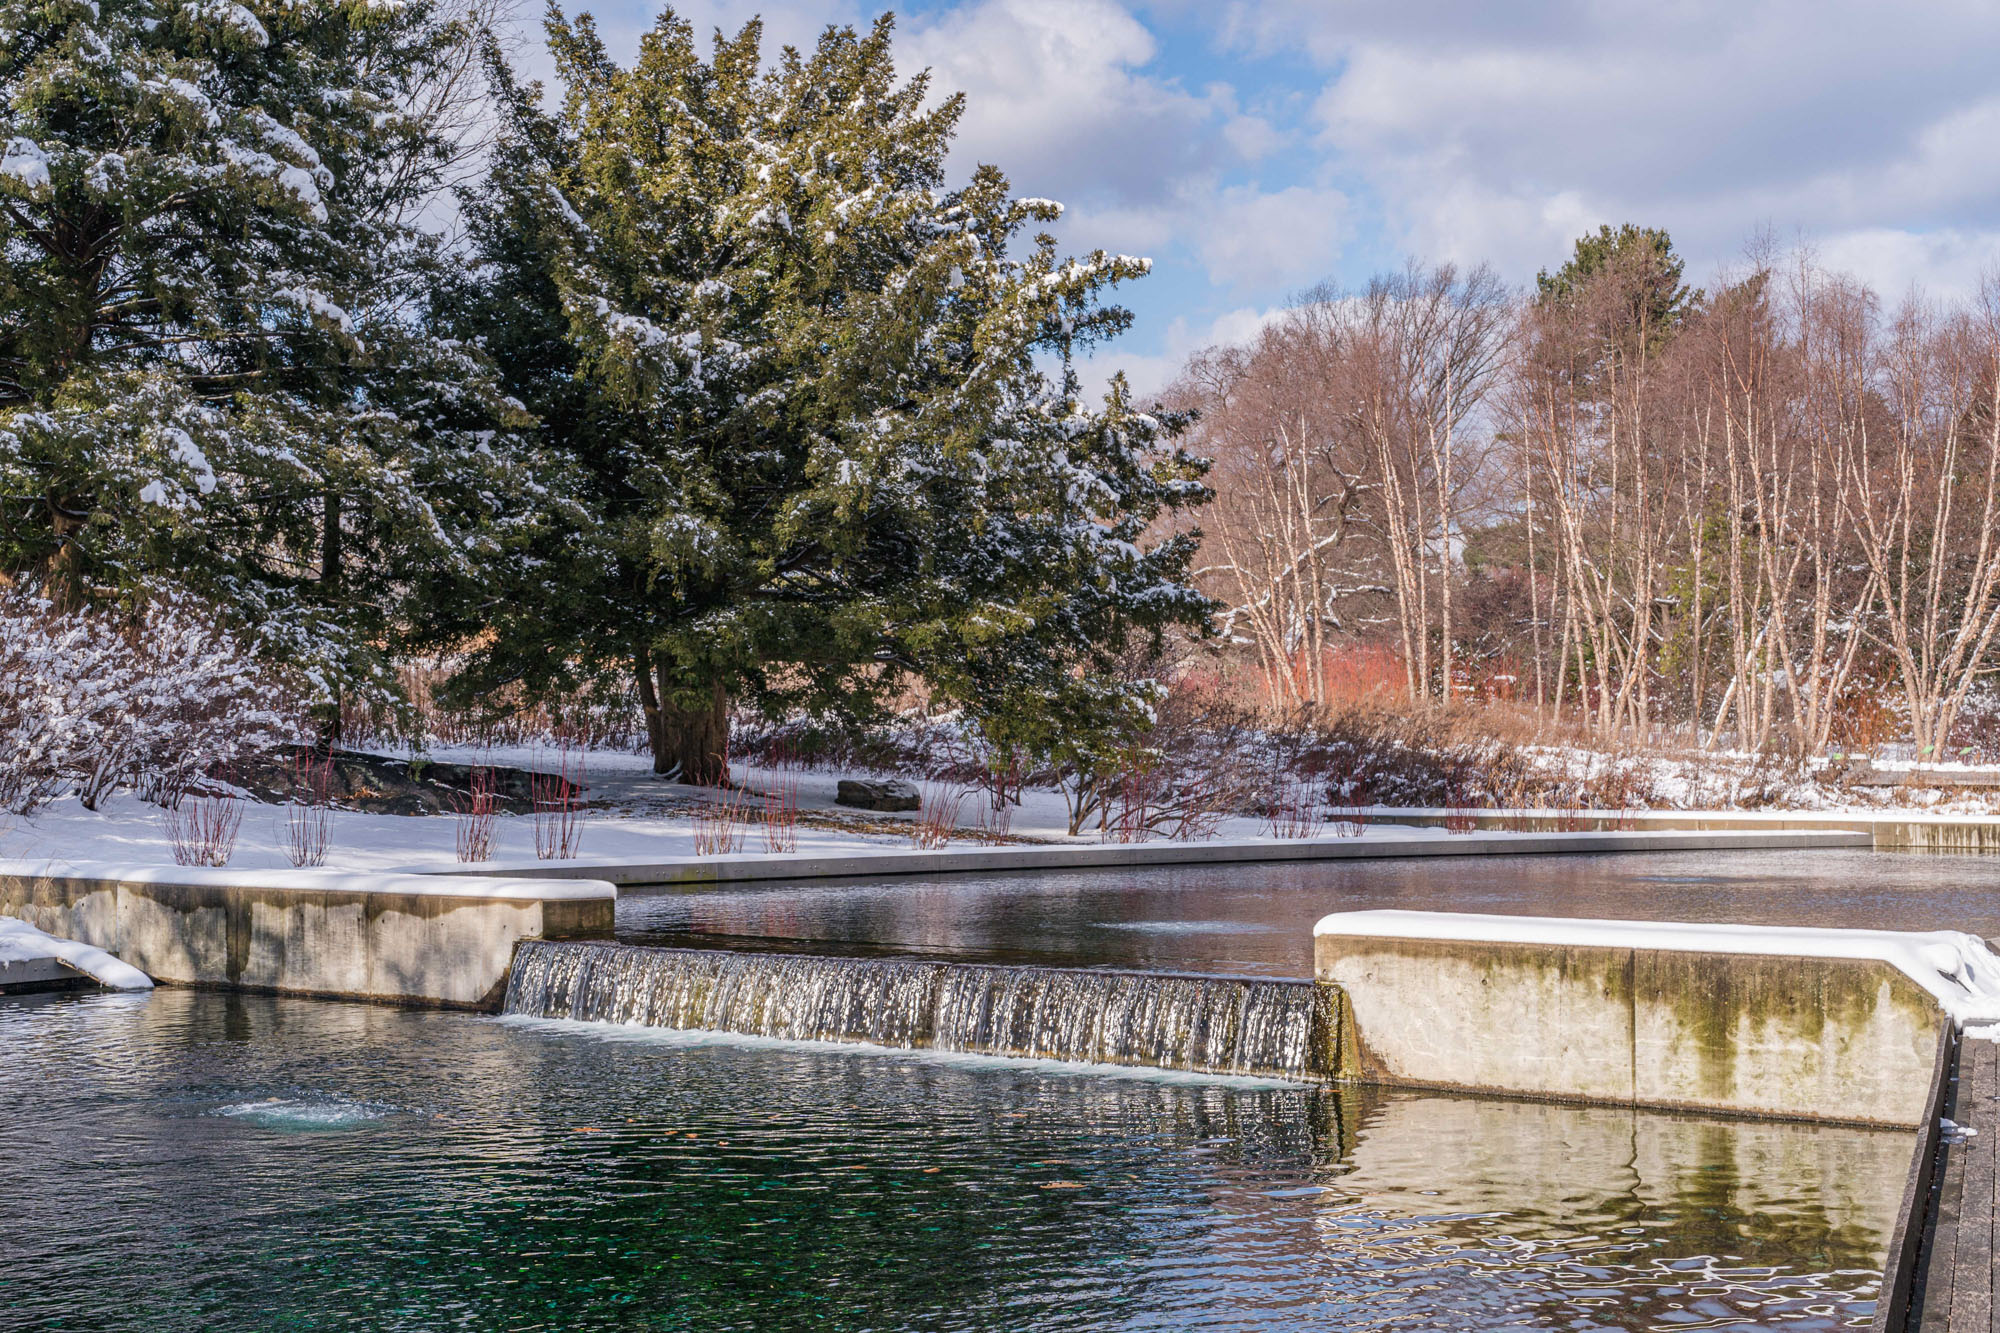 A water feature flows downward, surrounded by snow and icy trees